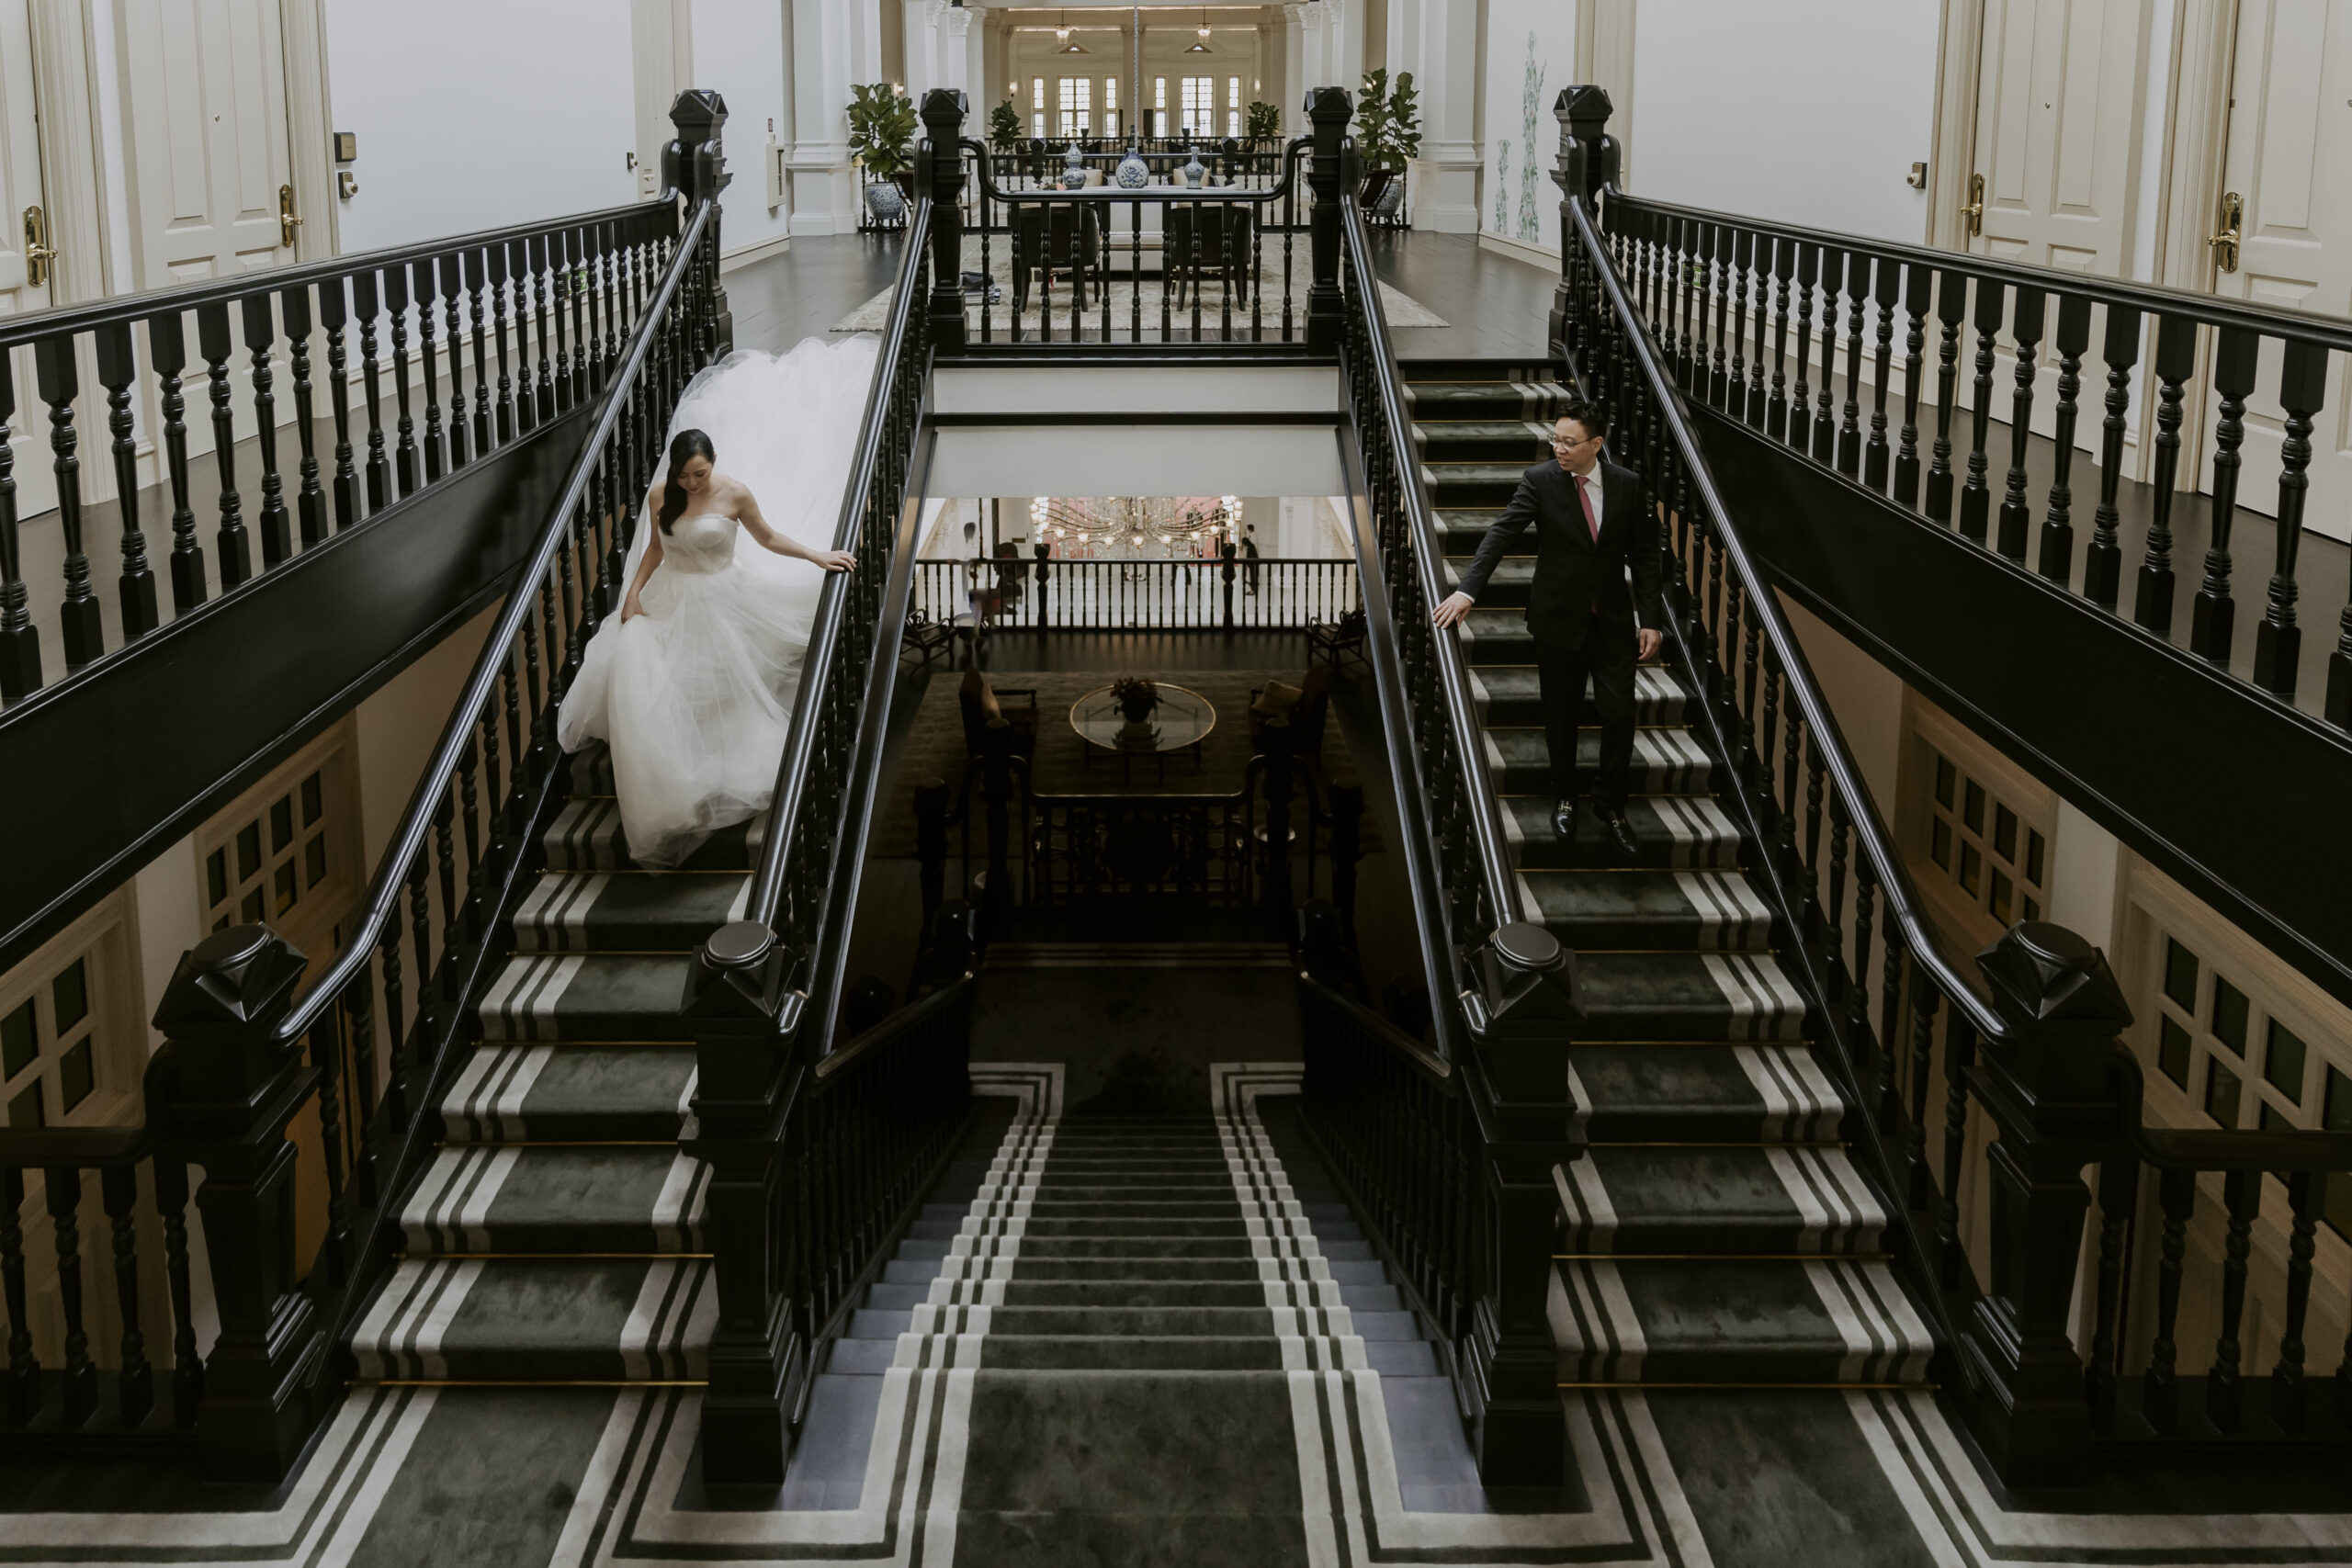 A bride and groom elegantly descending the stairs of Raffles Hotel Singapore for their wedding.